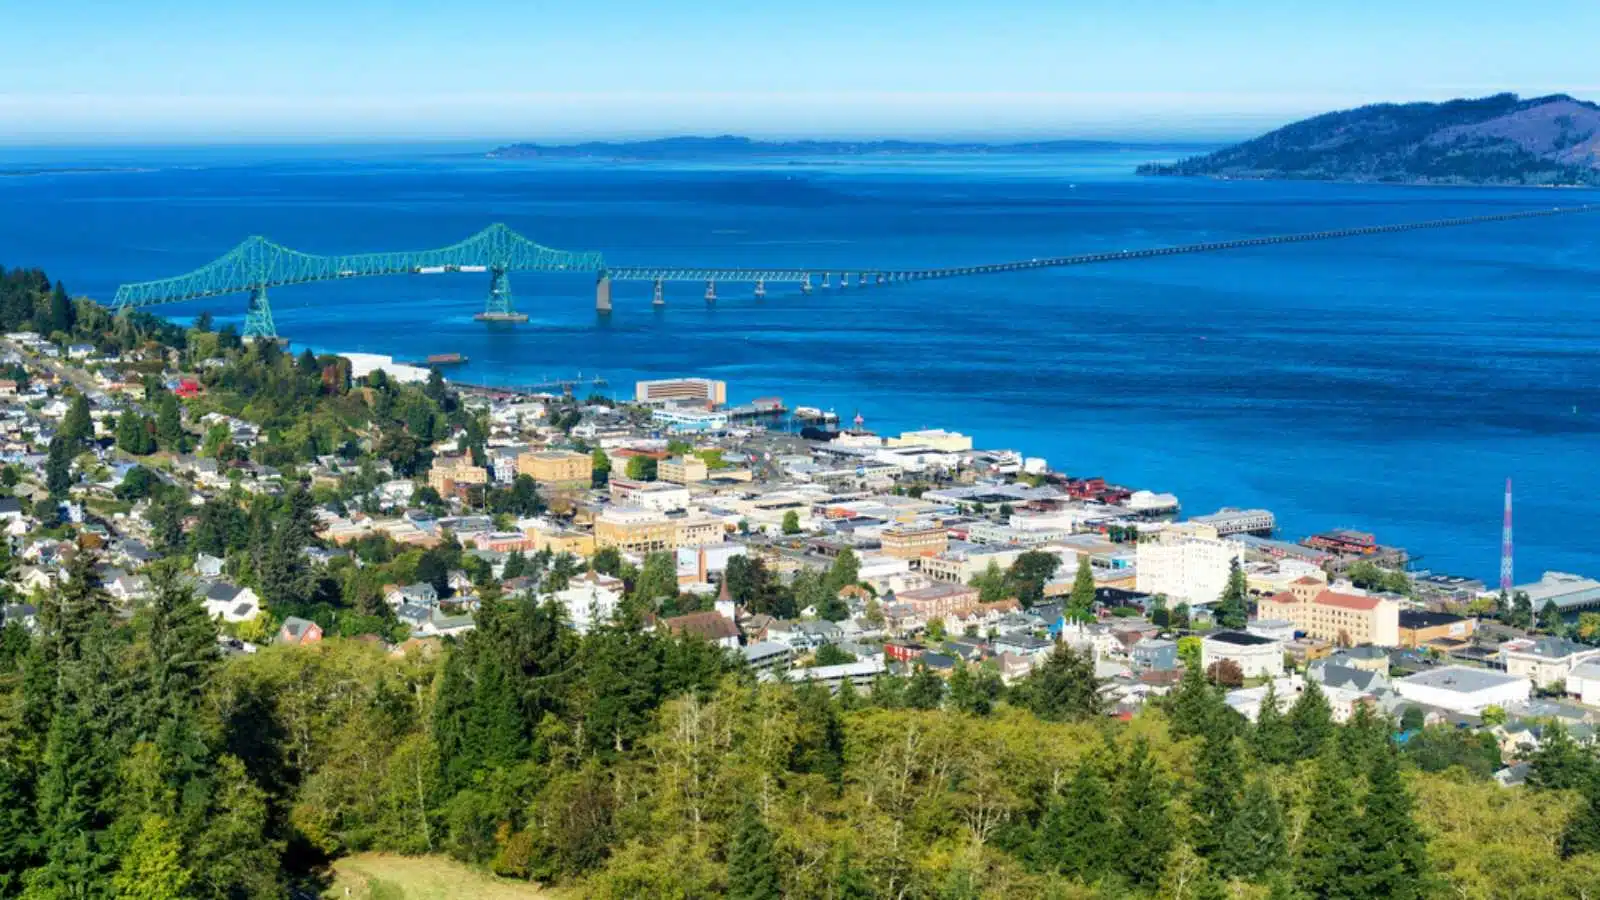 Astoria, Oregon, the first permanent U.S. settlement on the Pacific coast, overlooks the Astoria Megler bridge as it crosses the Columbia river to the state of Washington.